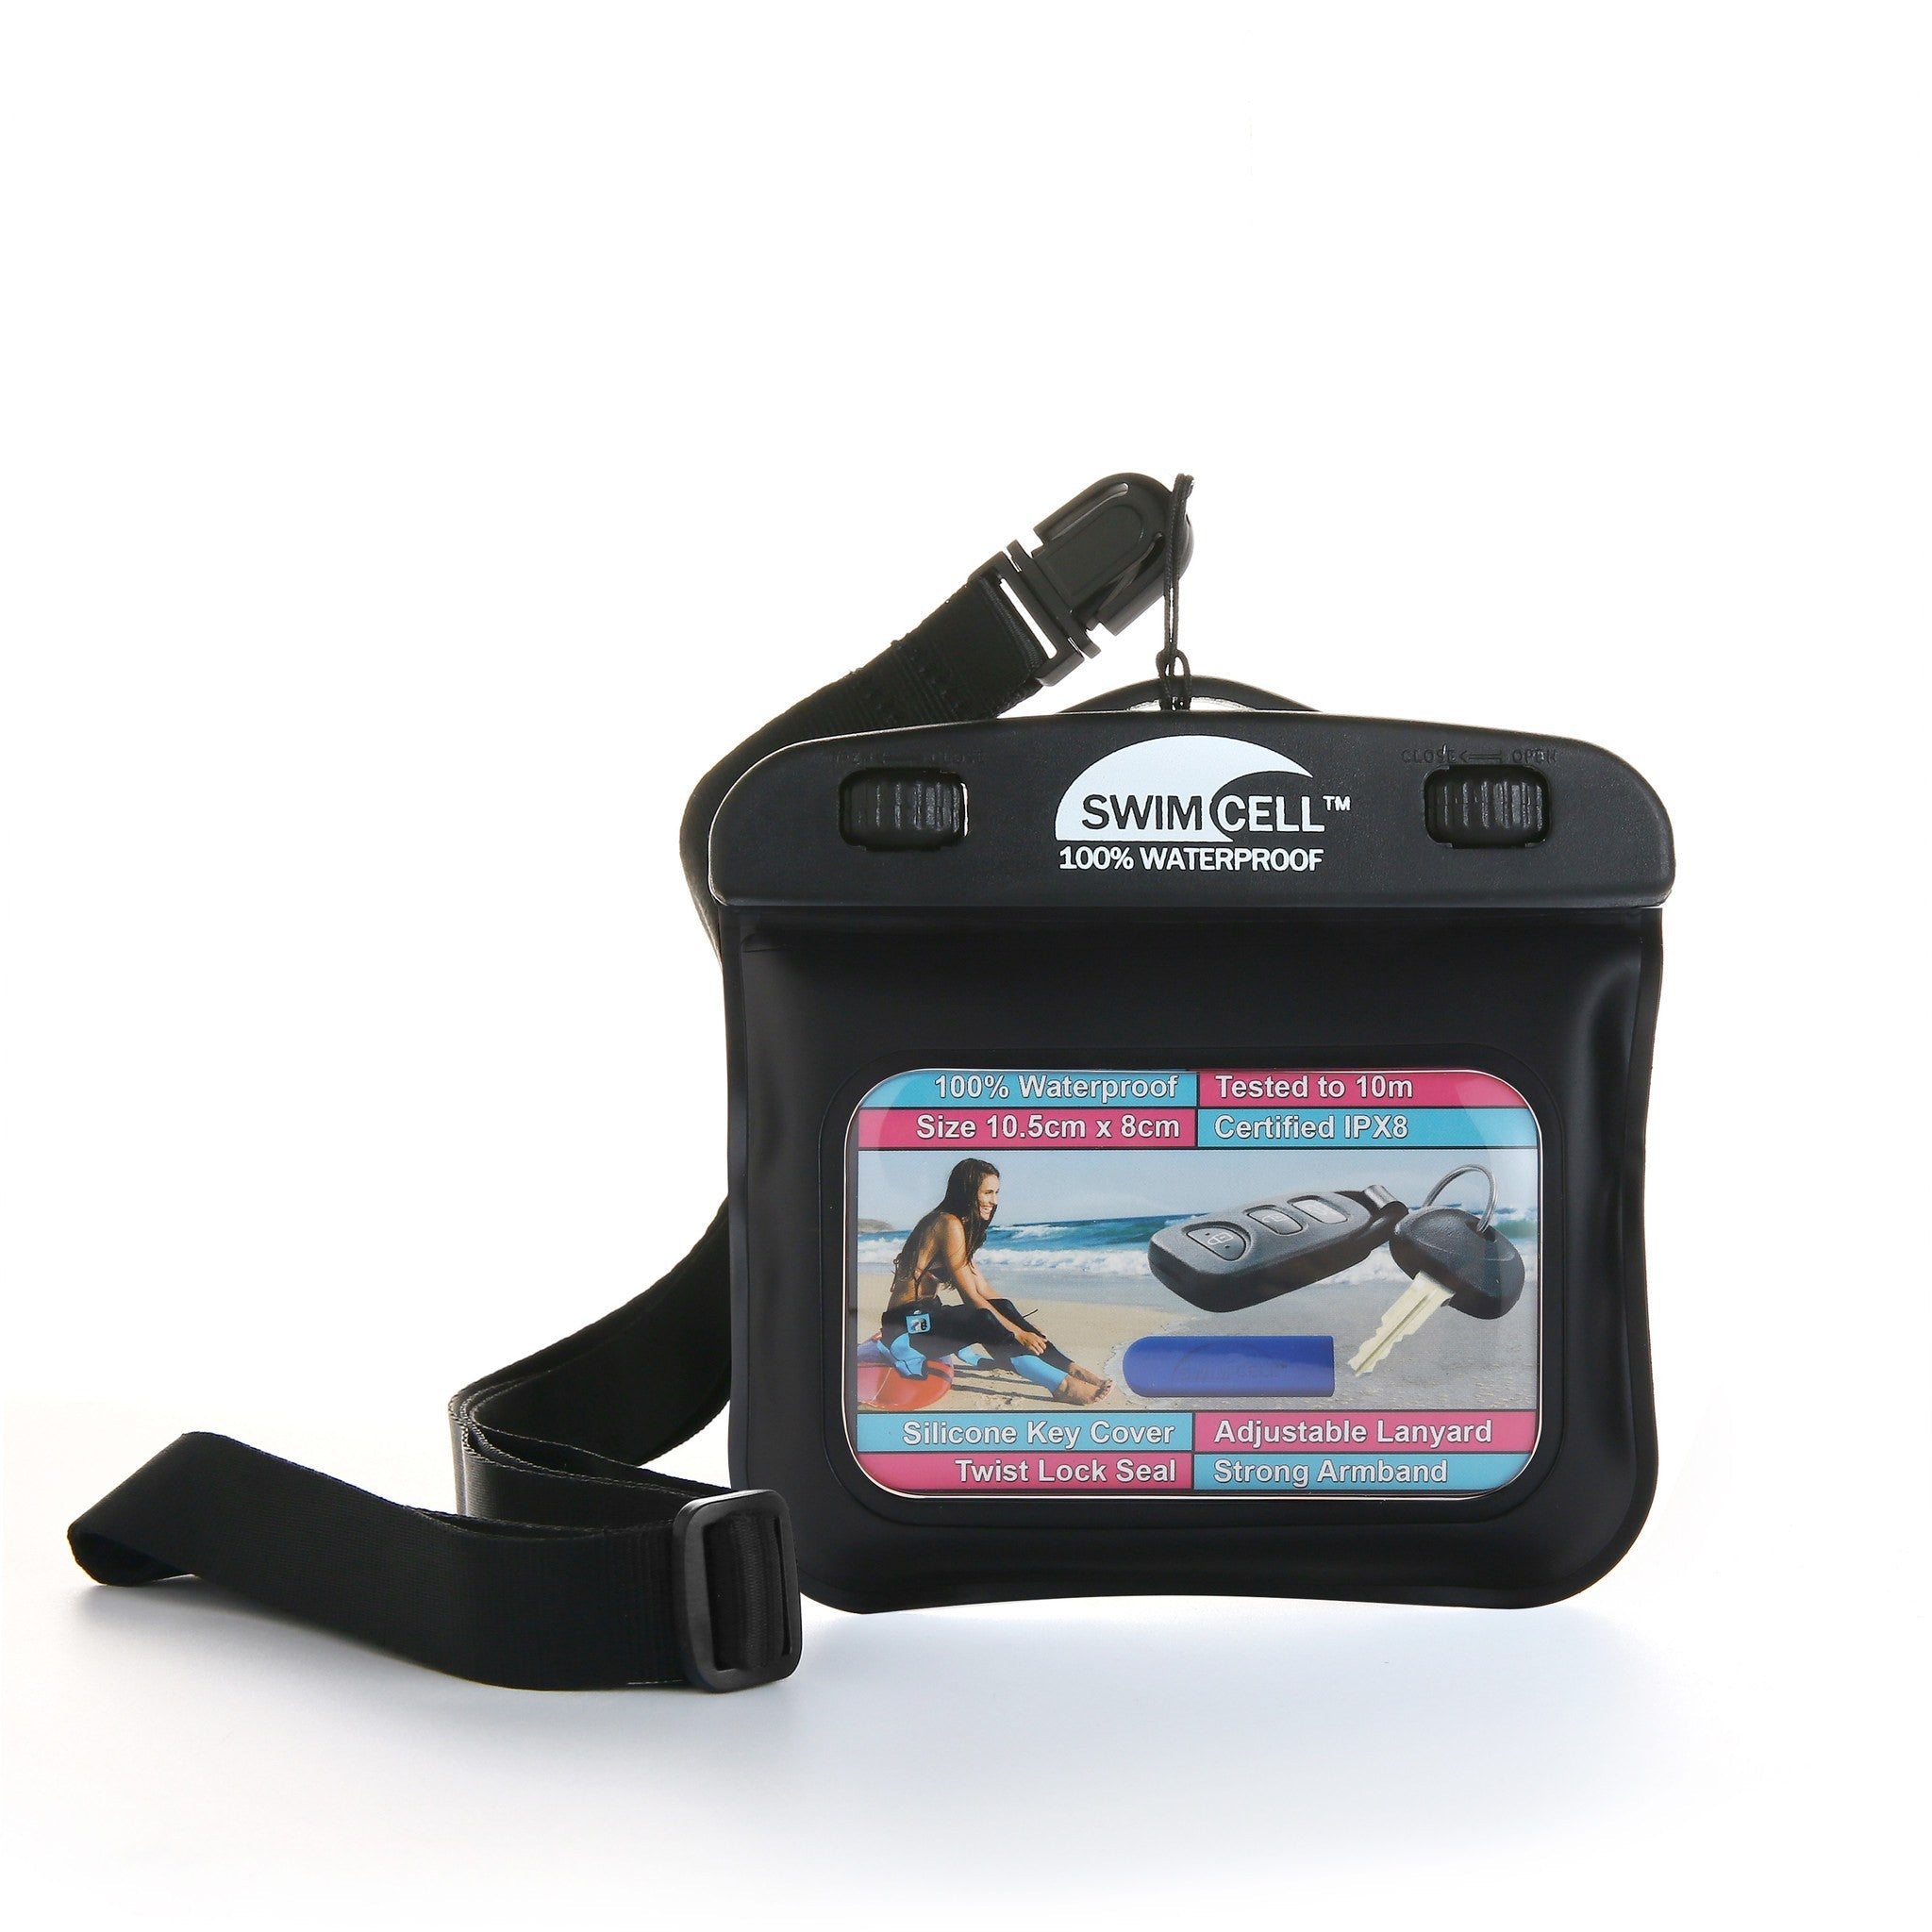 SwimCell waterproof pouch for key and money